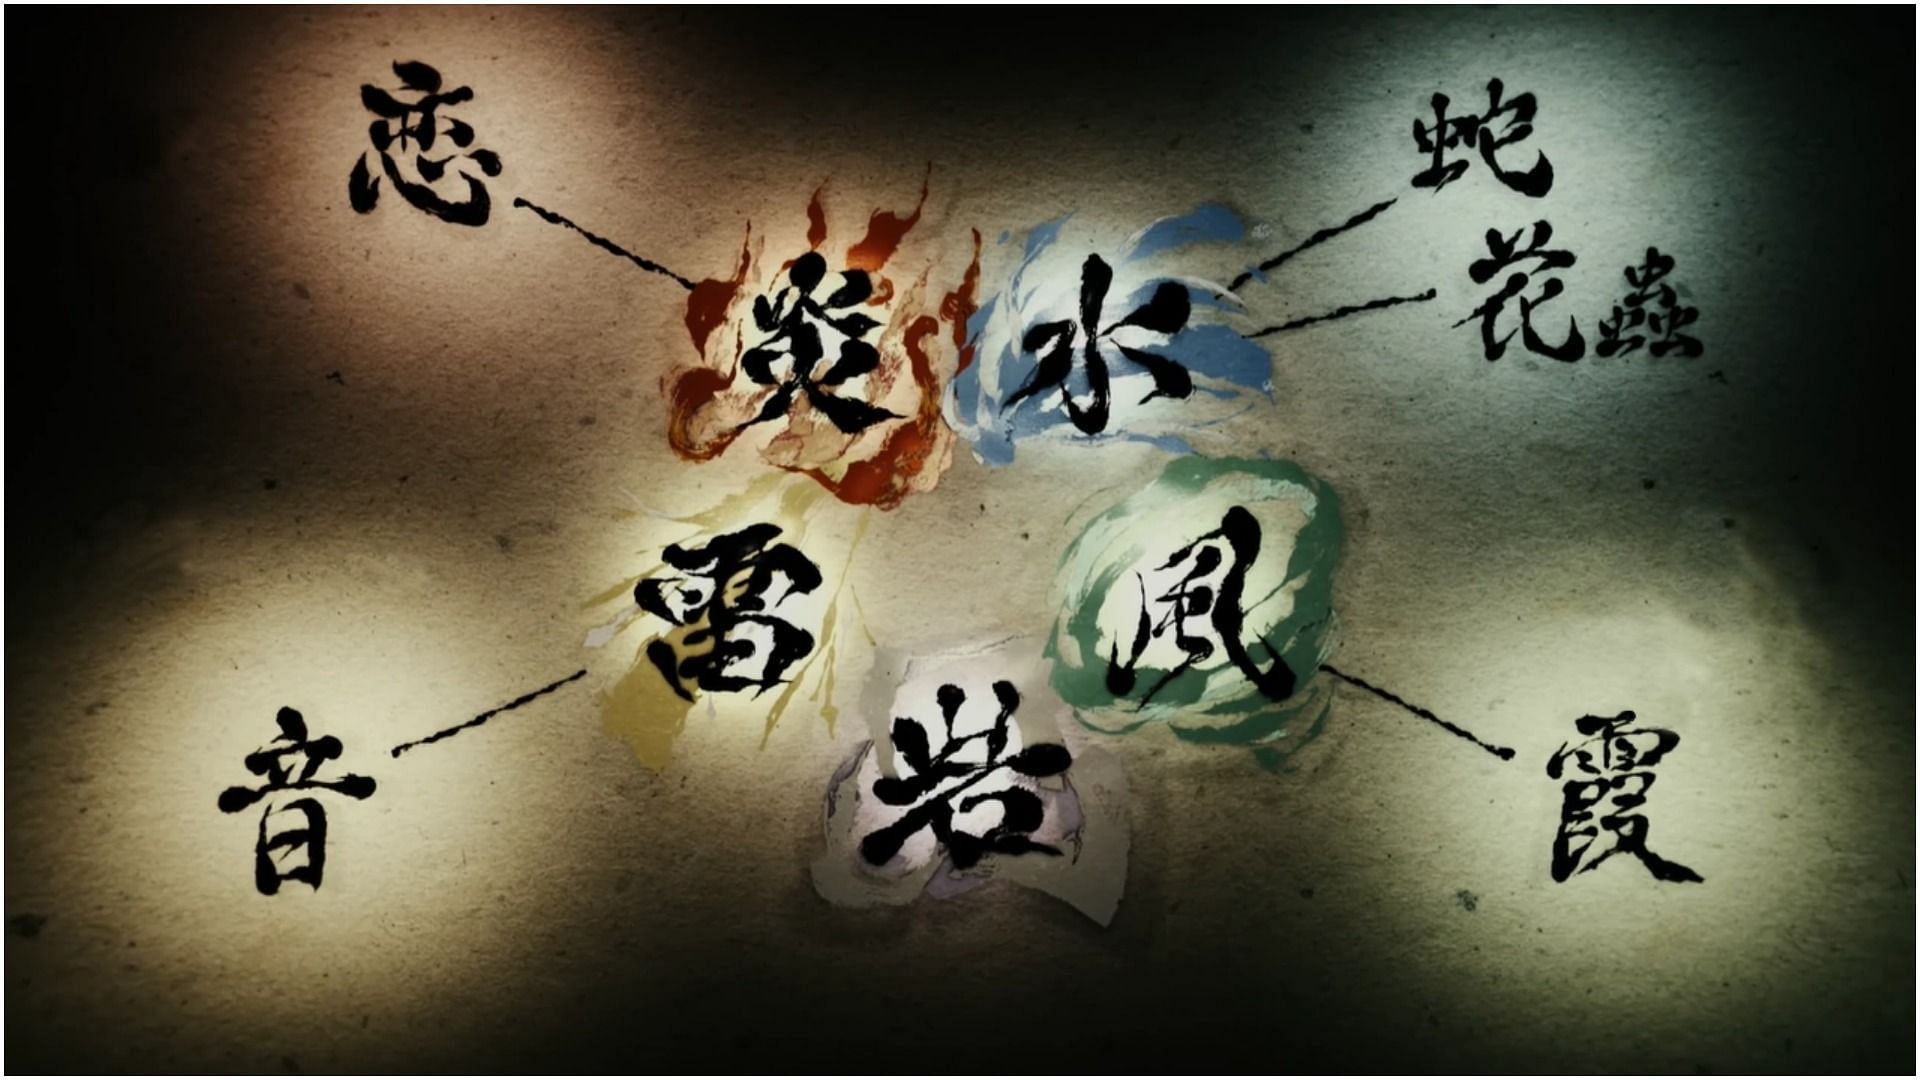 A pictorial representation of Breathing Styles (Image via Ufotable)